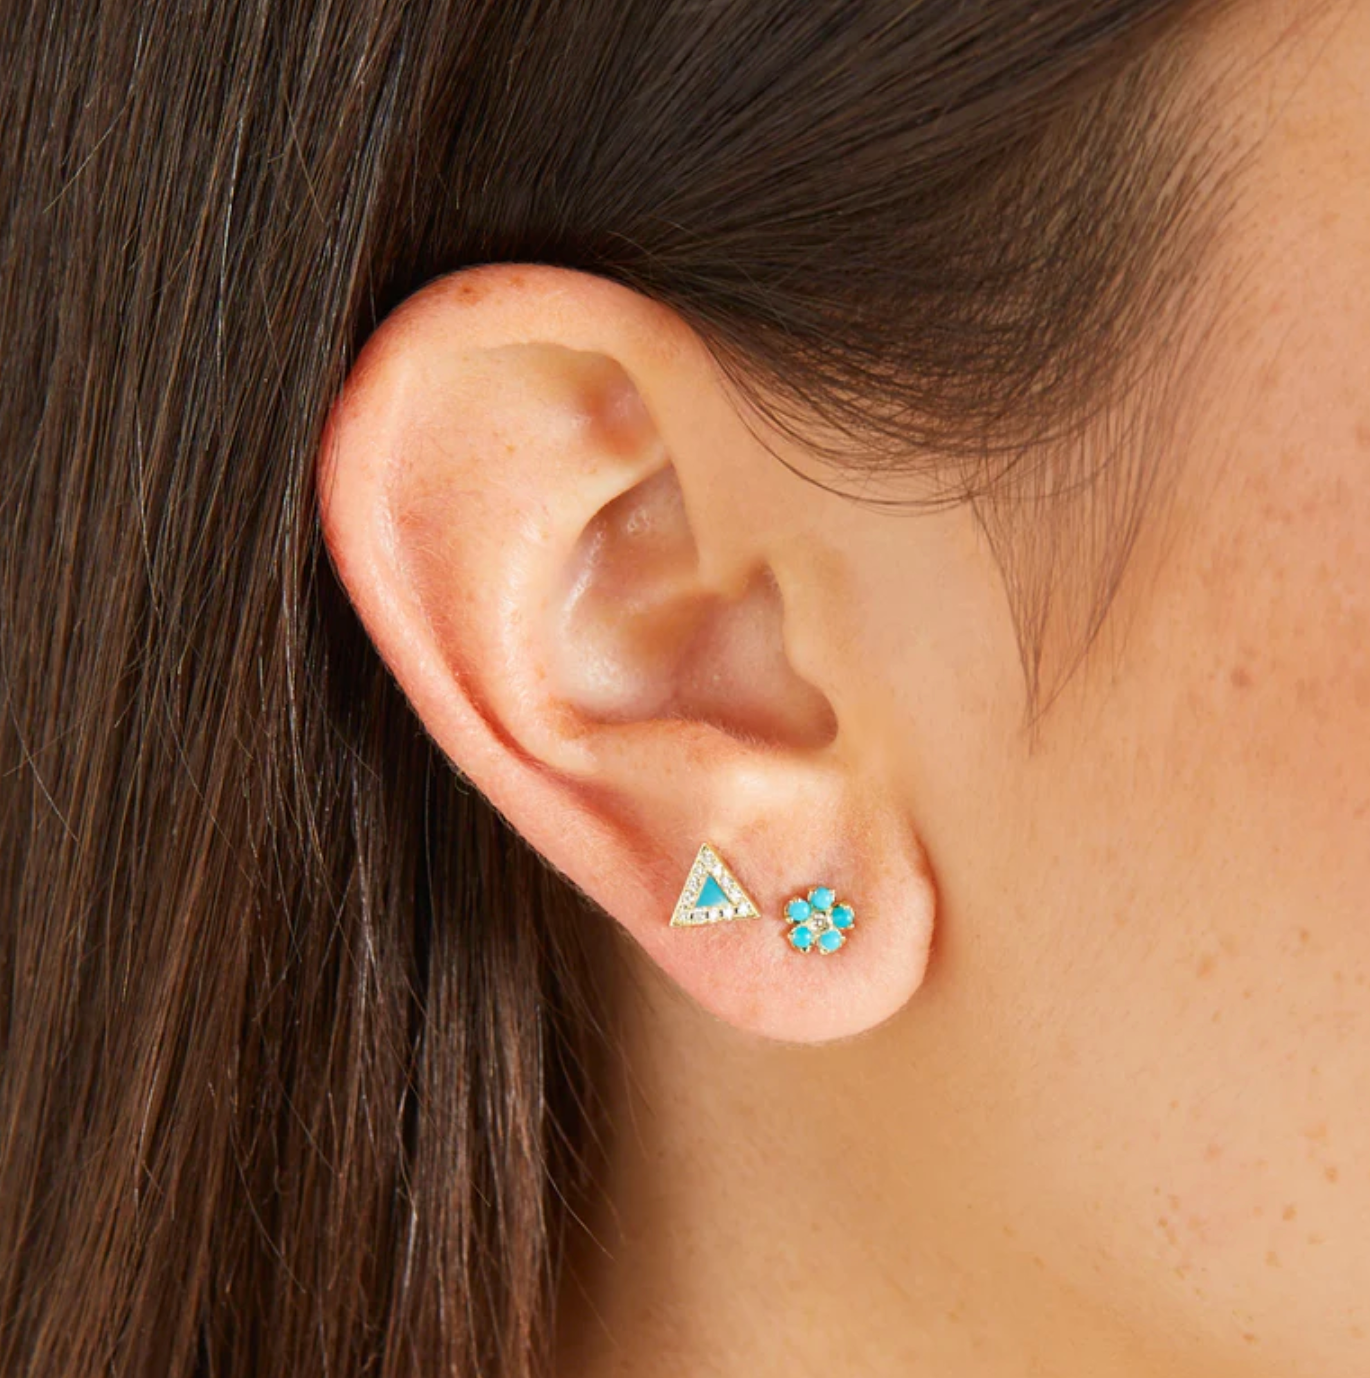 Turquoise Flower Studs with Diamond Center